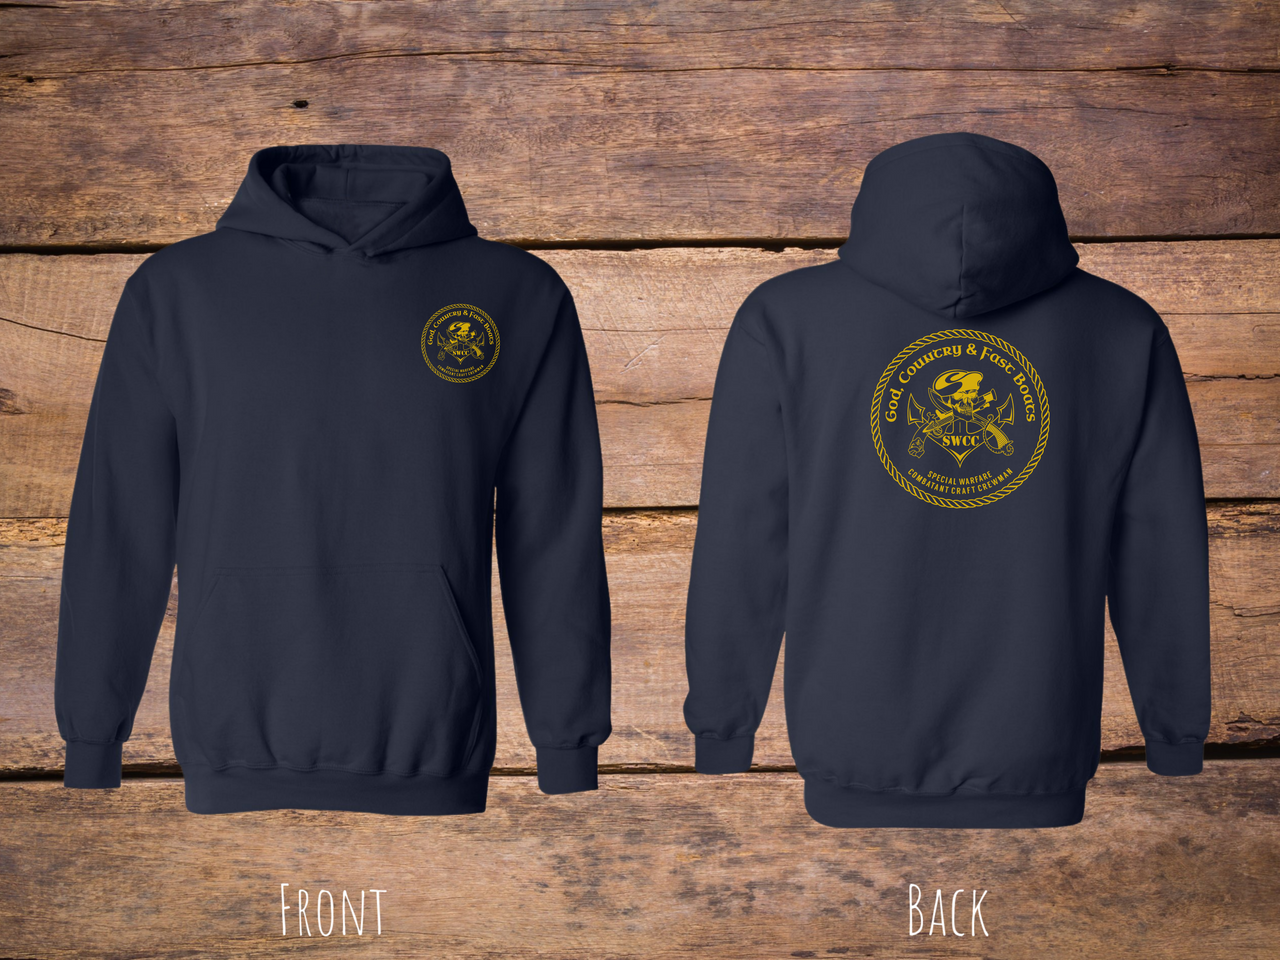 God Country & Fast Boats Hoodie (Gold)